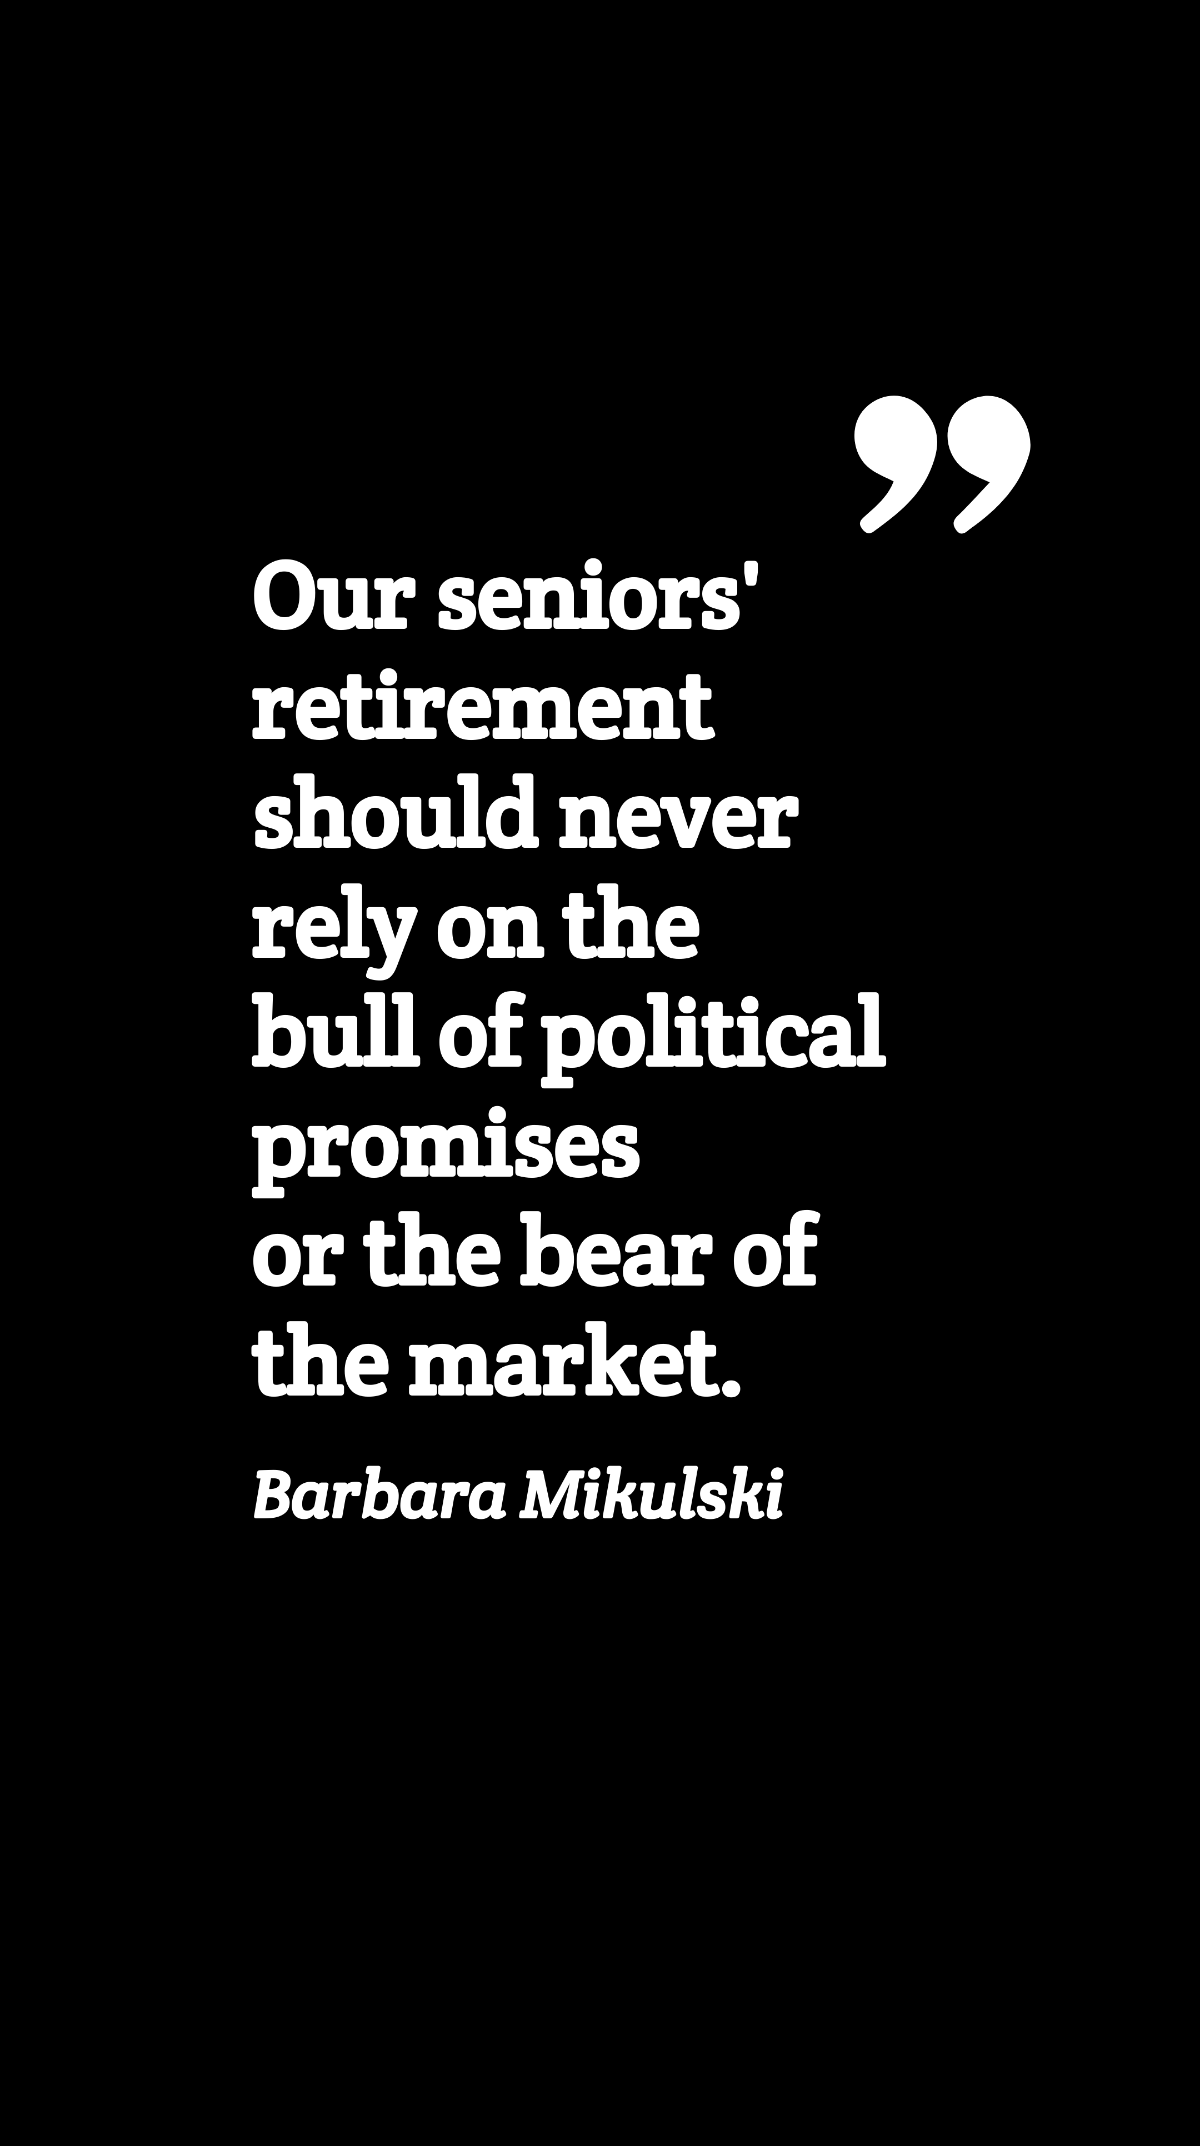 Barbara Mikulski - Our seniors' retirement should never rely on the bull of political promises or the bear of the market.